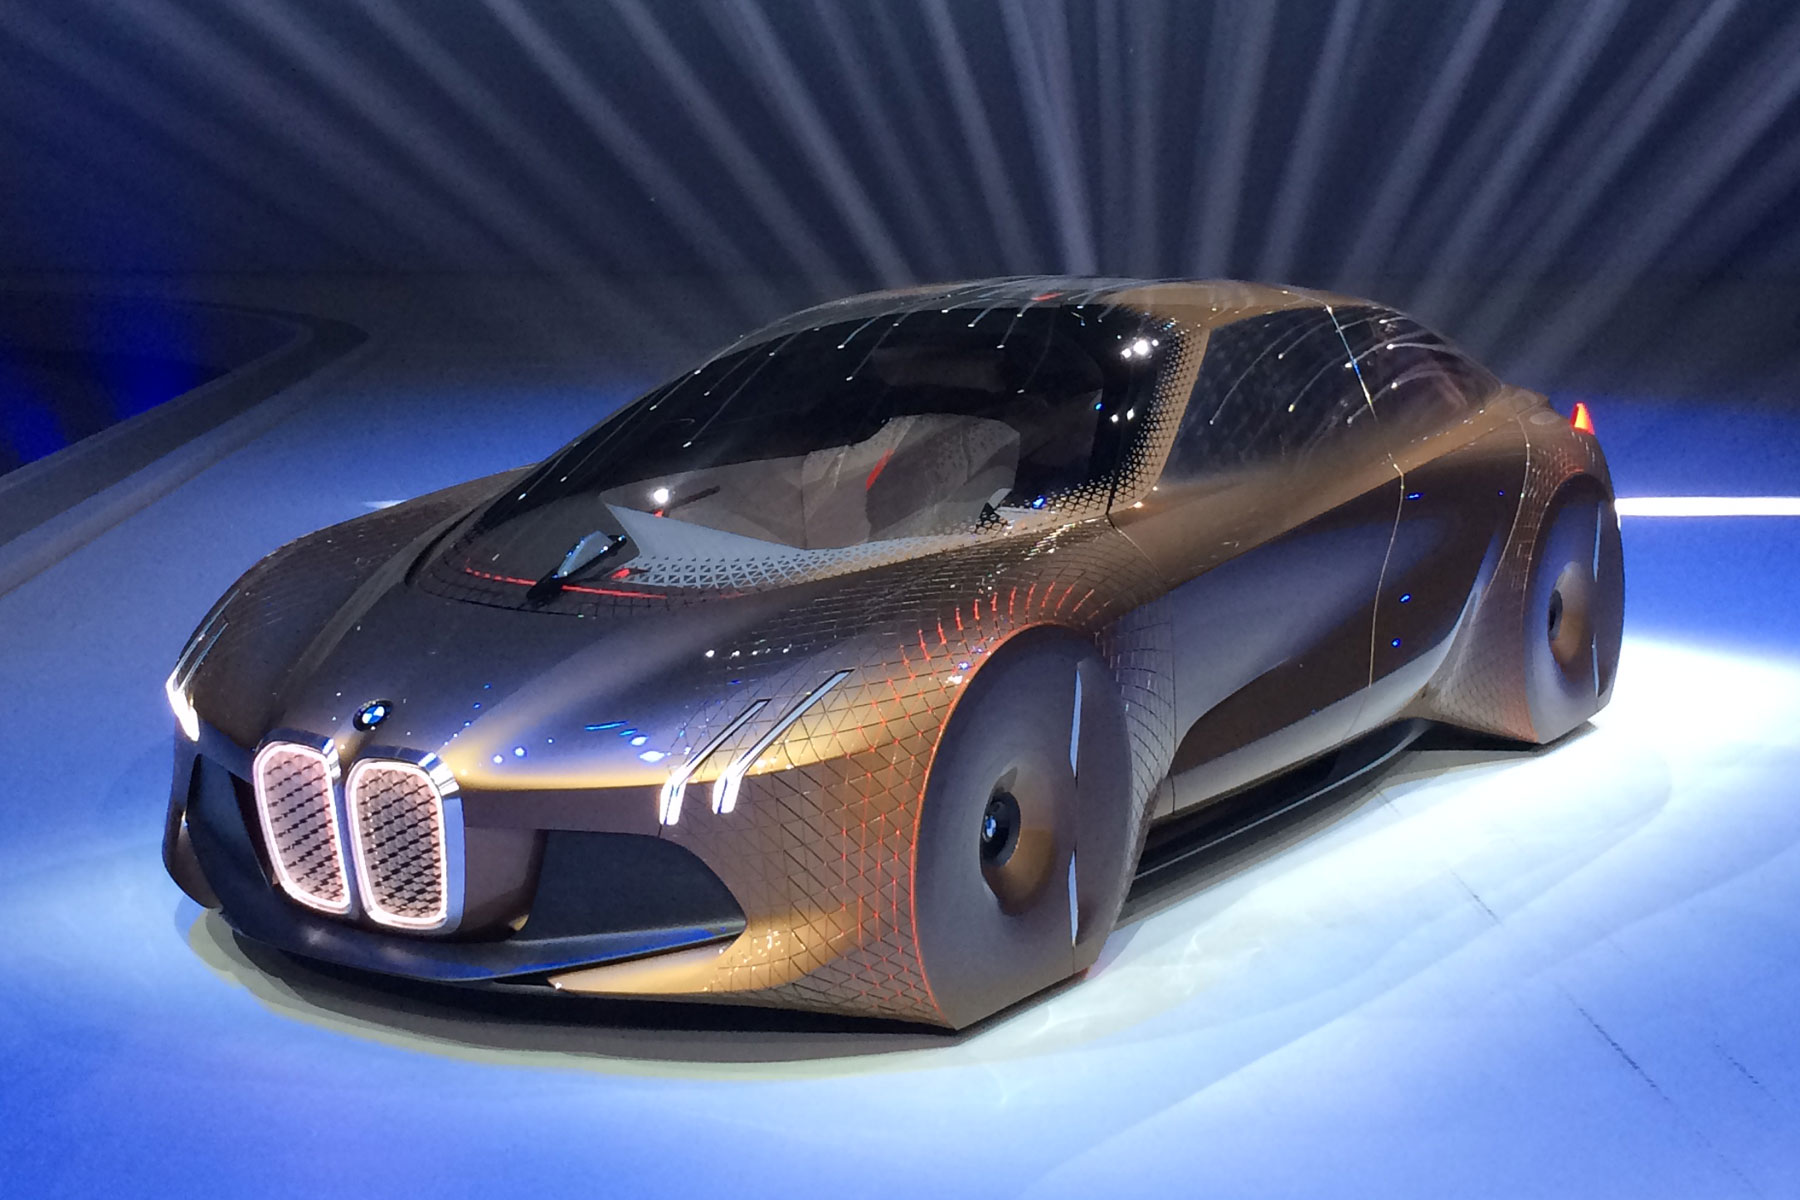 BMW Vision Next 100 concept car revealed on 100th anniversary – with video and exclusive picture